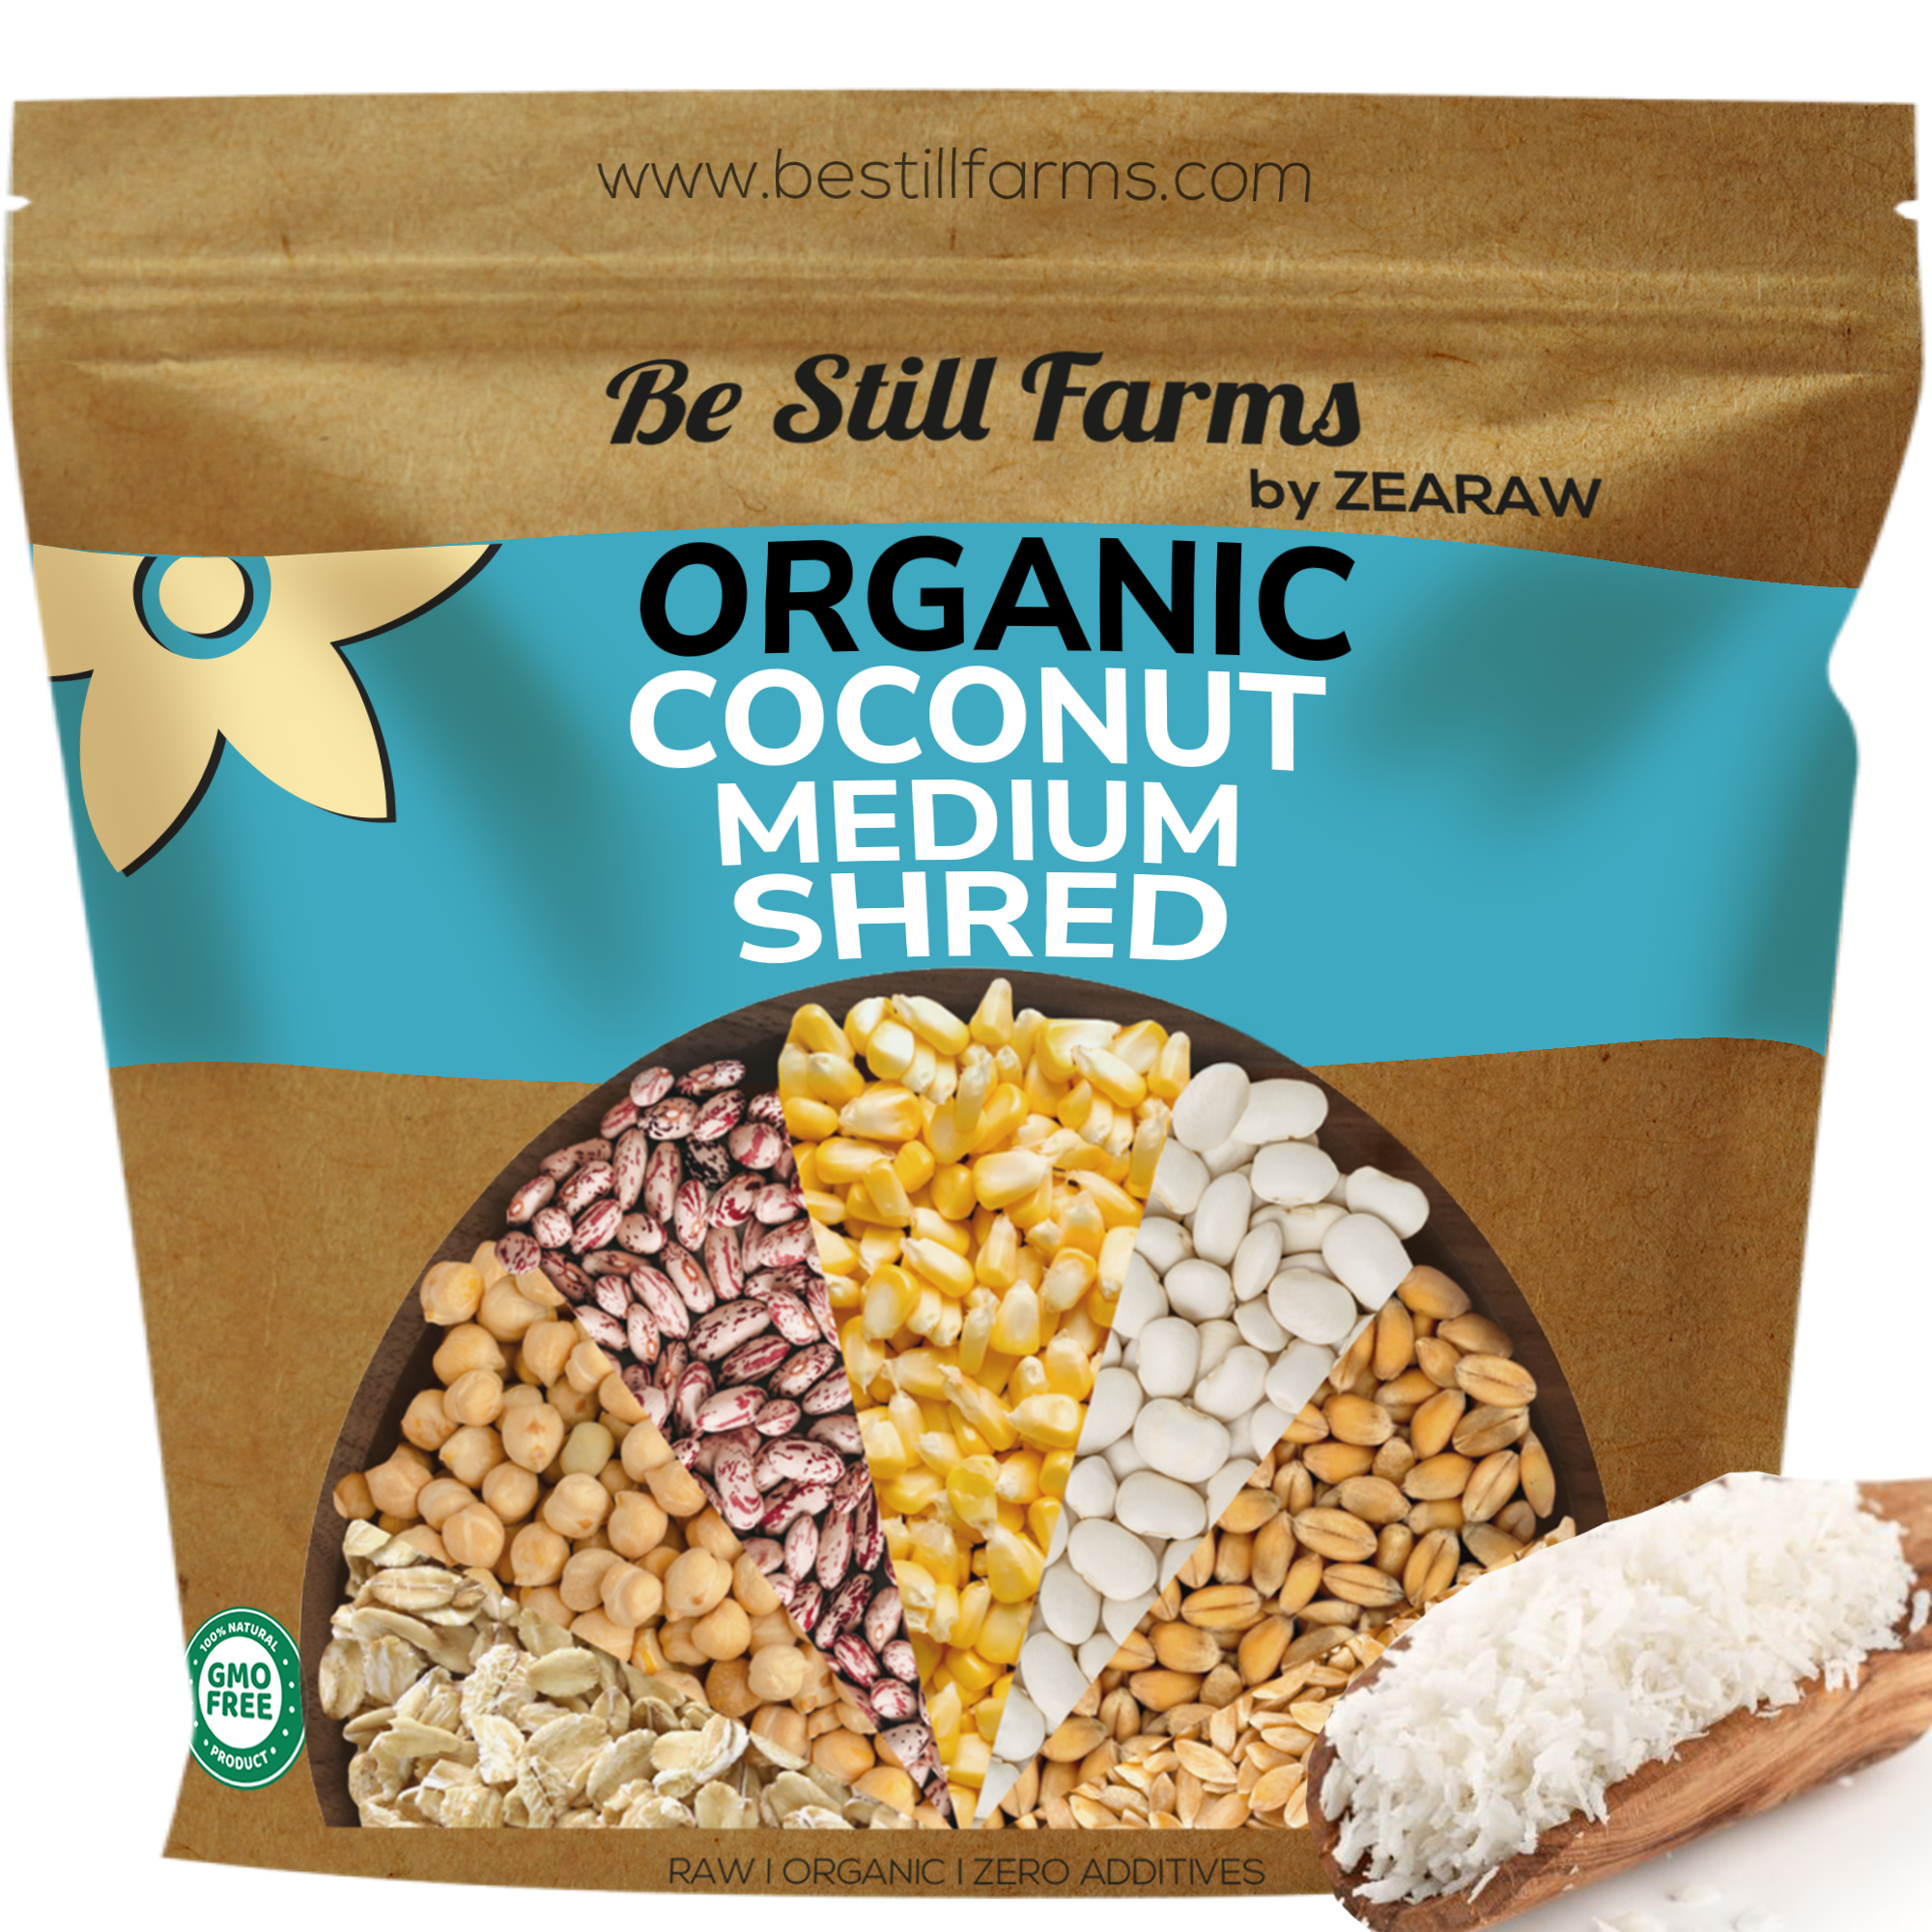 Coconut shreds are grown in USA and USDA certified;